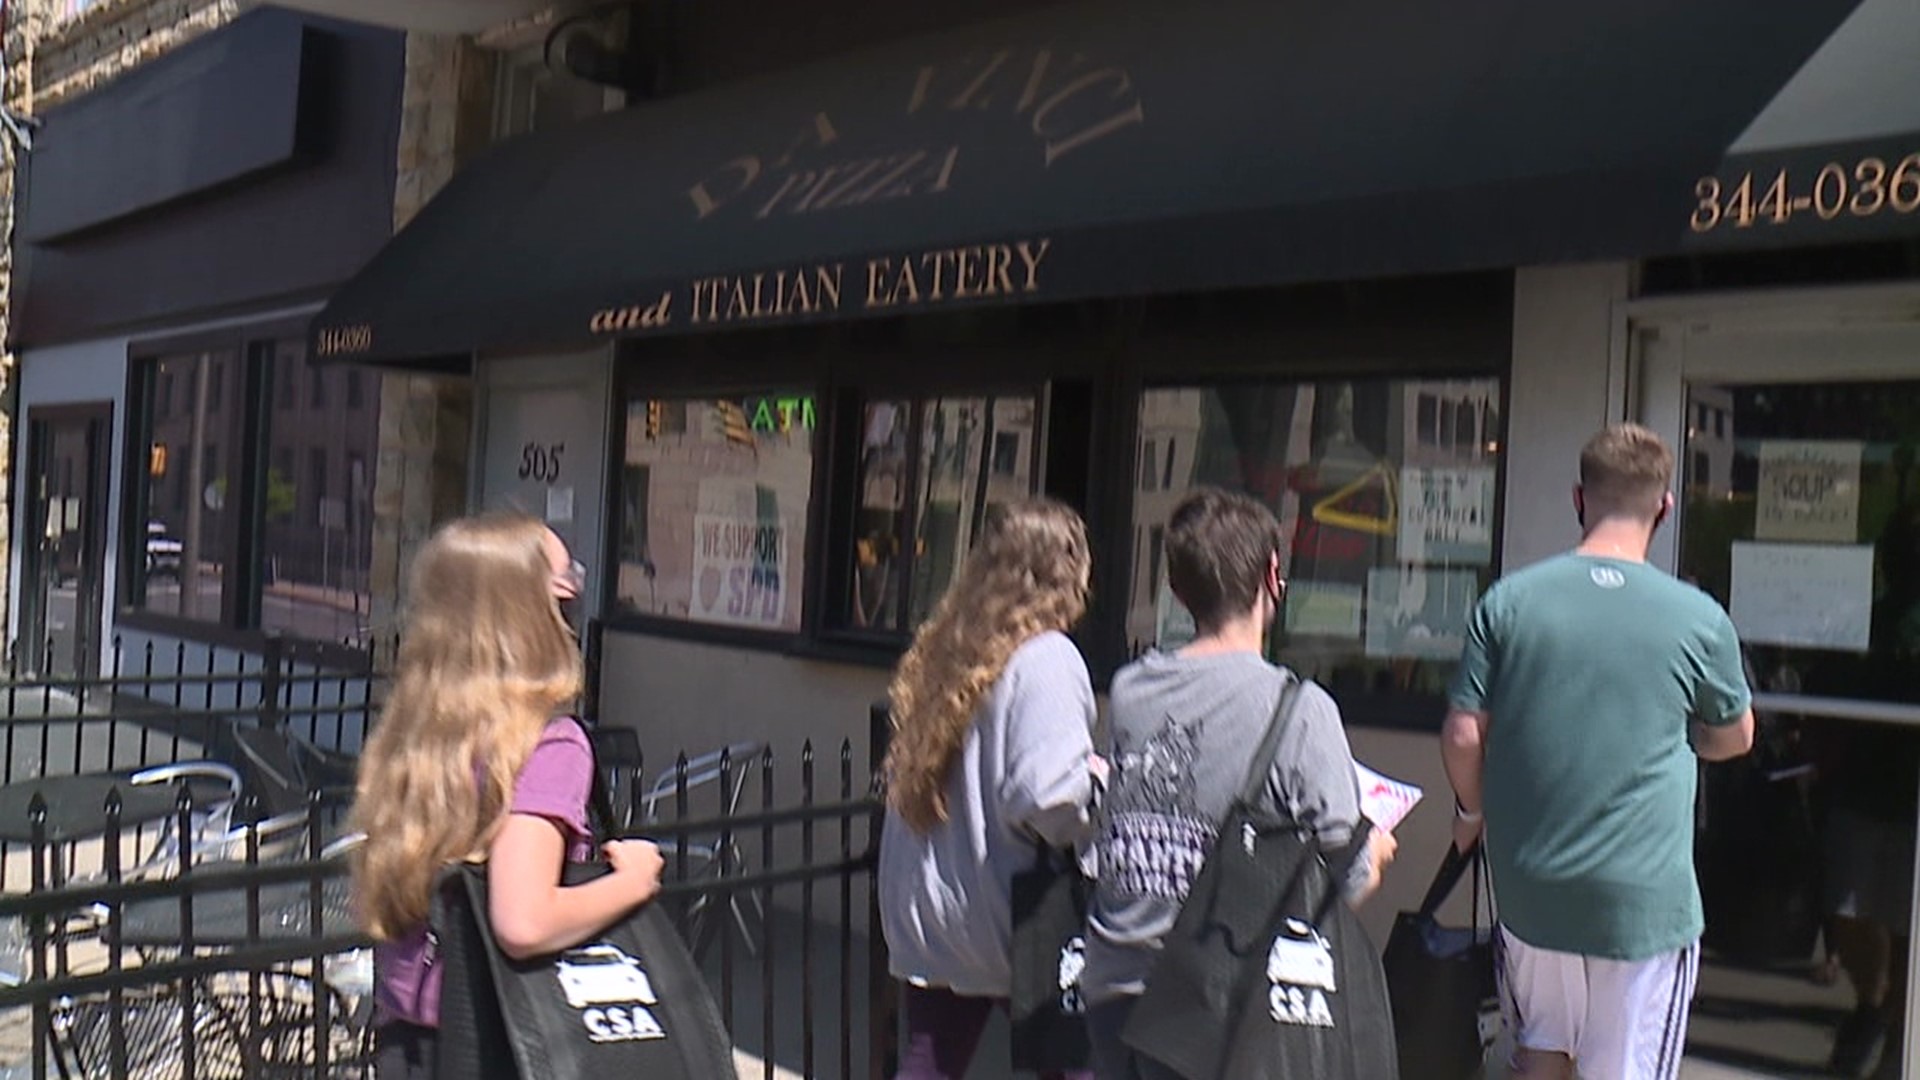 Students at the University of Scranton came up with a way to promote downtown restaurants and encourage their peers to get out and explore the city.